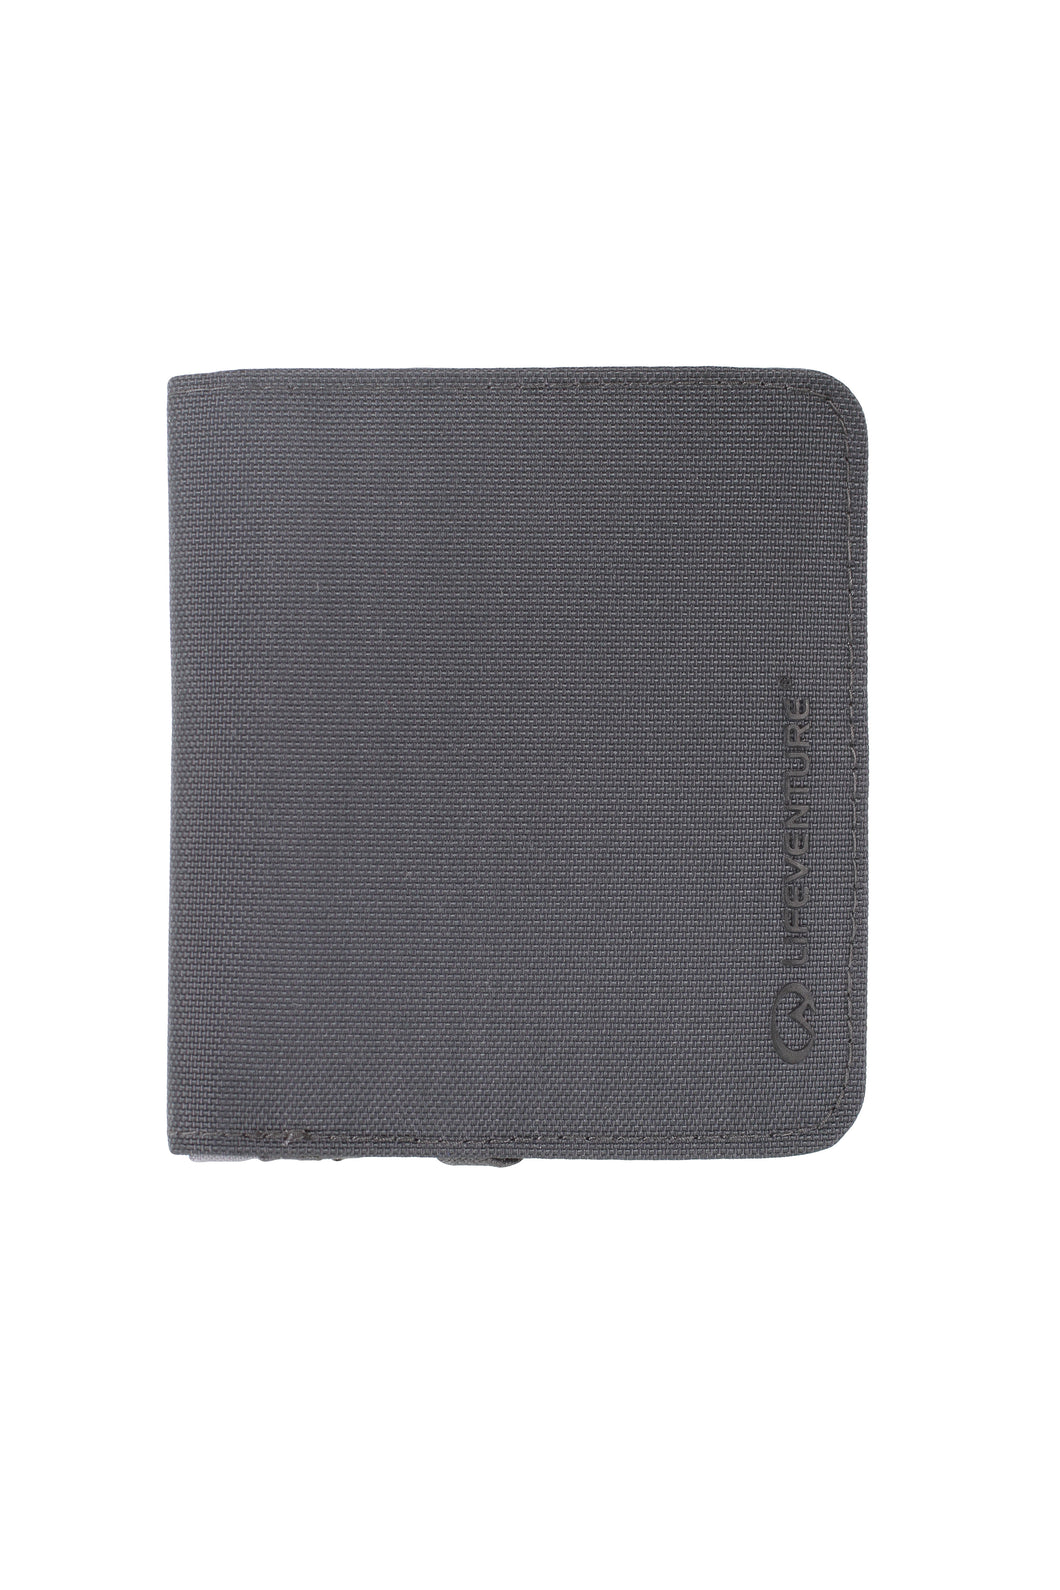 Lifeventure RFiD Compact Recycled Wallet (Grey)